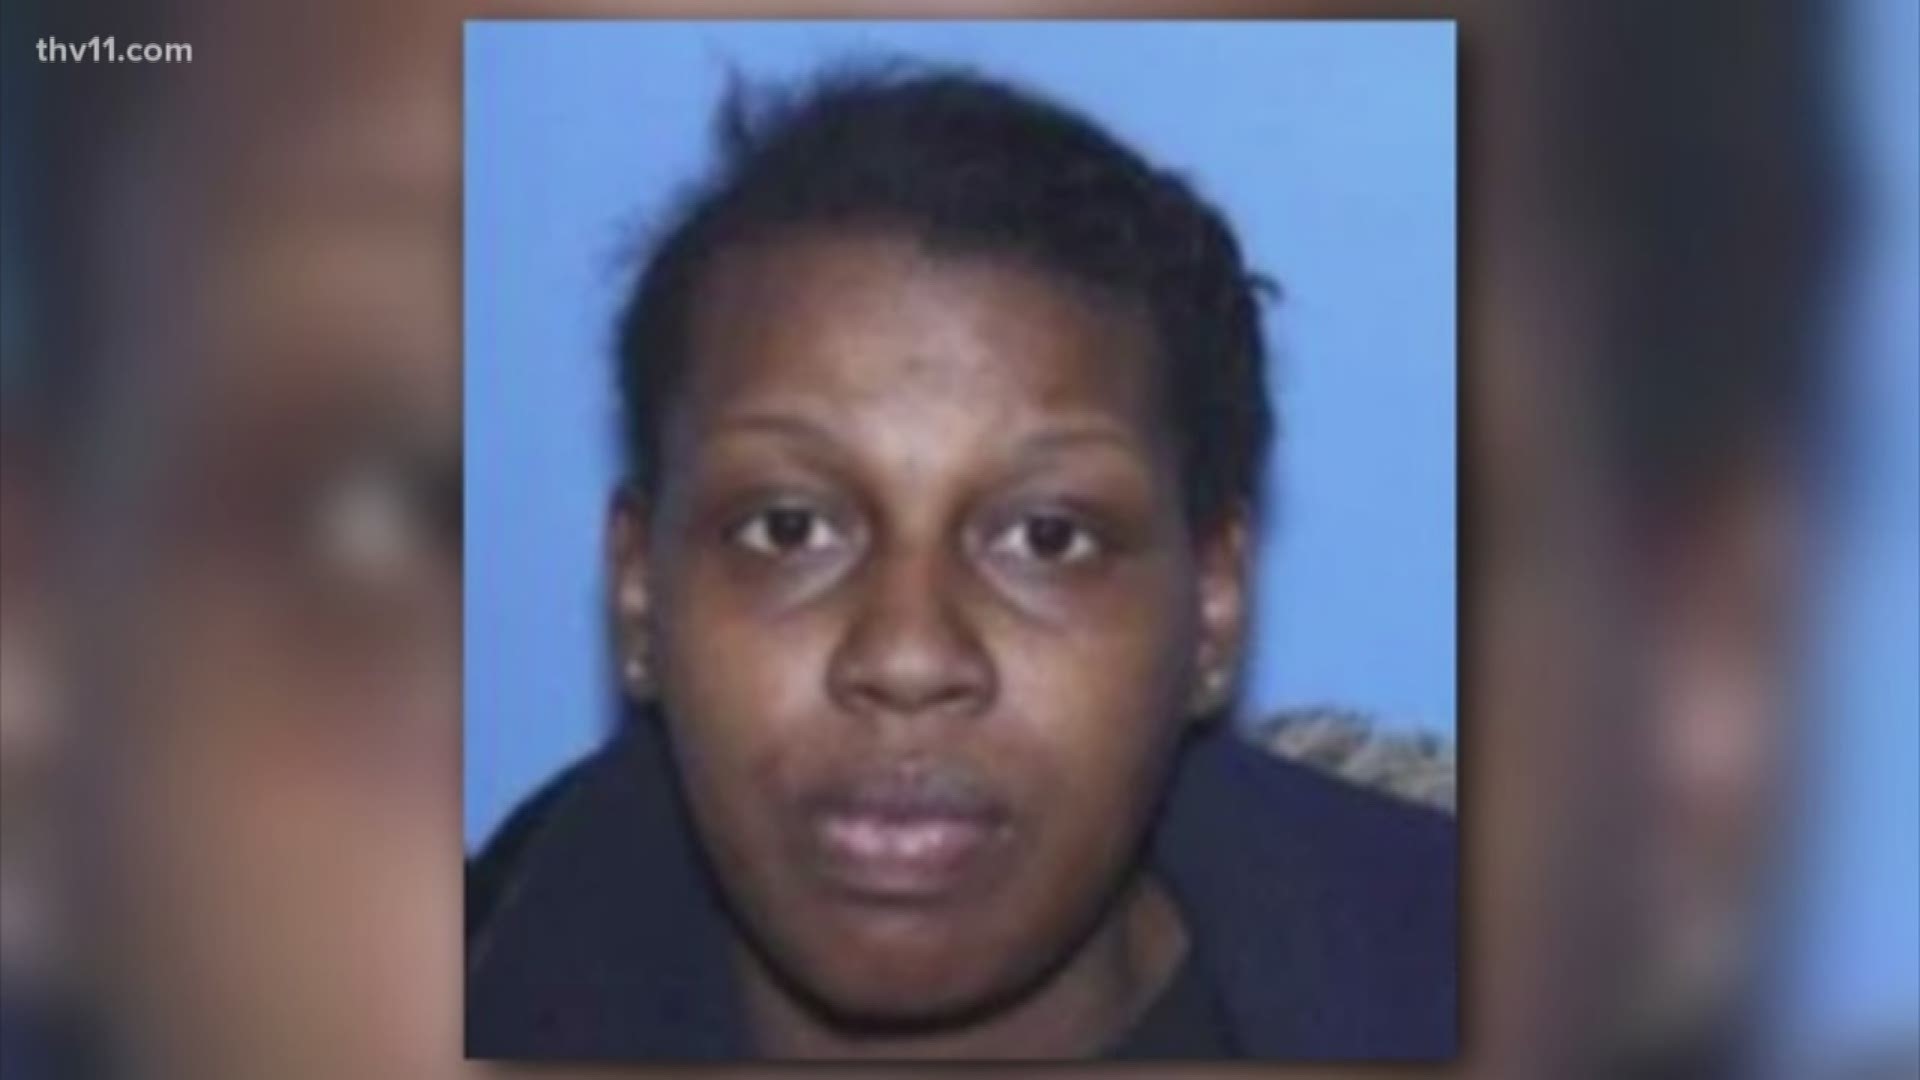 police said 34-year-old Kadaysha Bedford allegedly left drugs out at a hotel room on May 2. The child then reportedly ate the drugs and passed away.